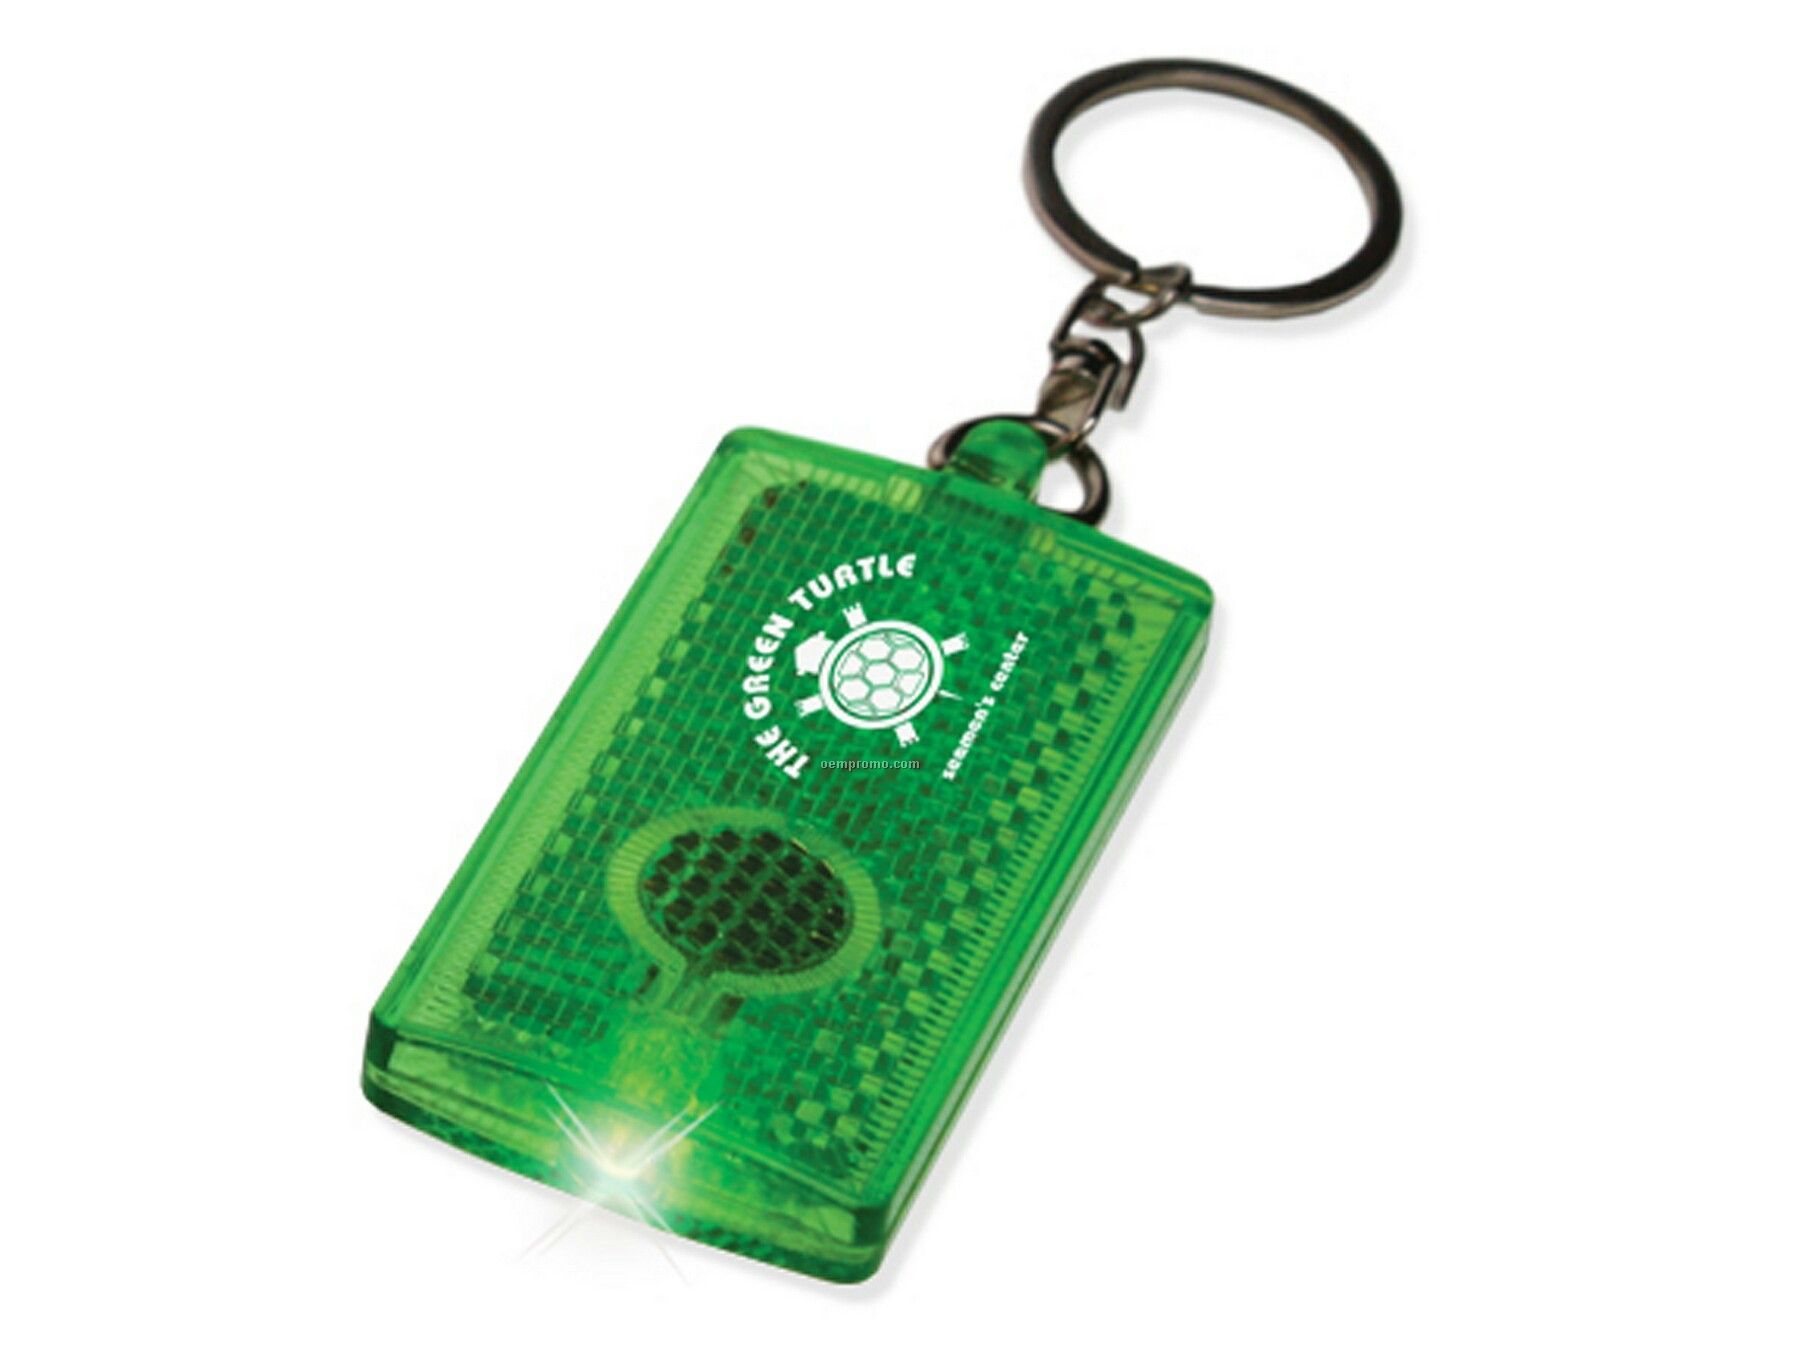 Prismatic Keychain Light In Kiwi Green With White LED